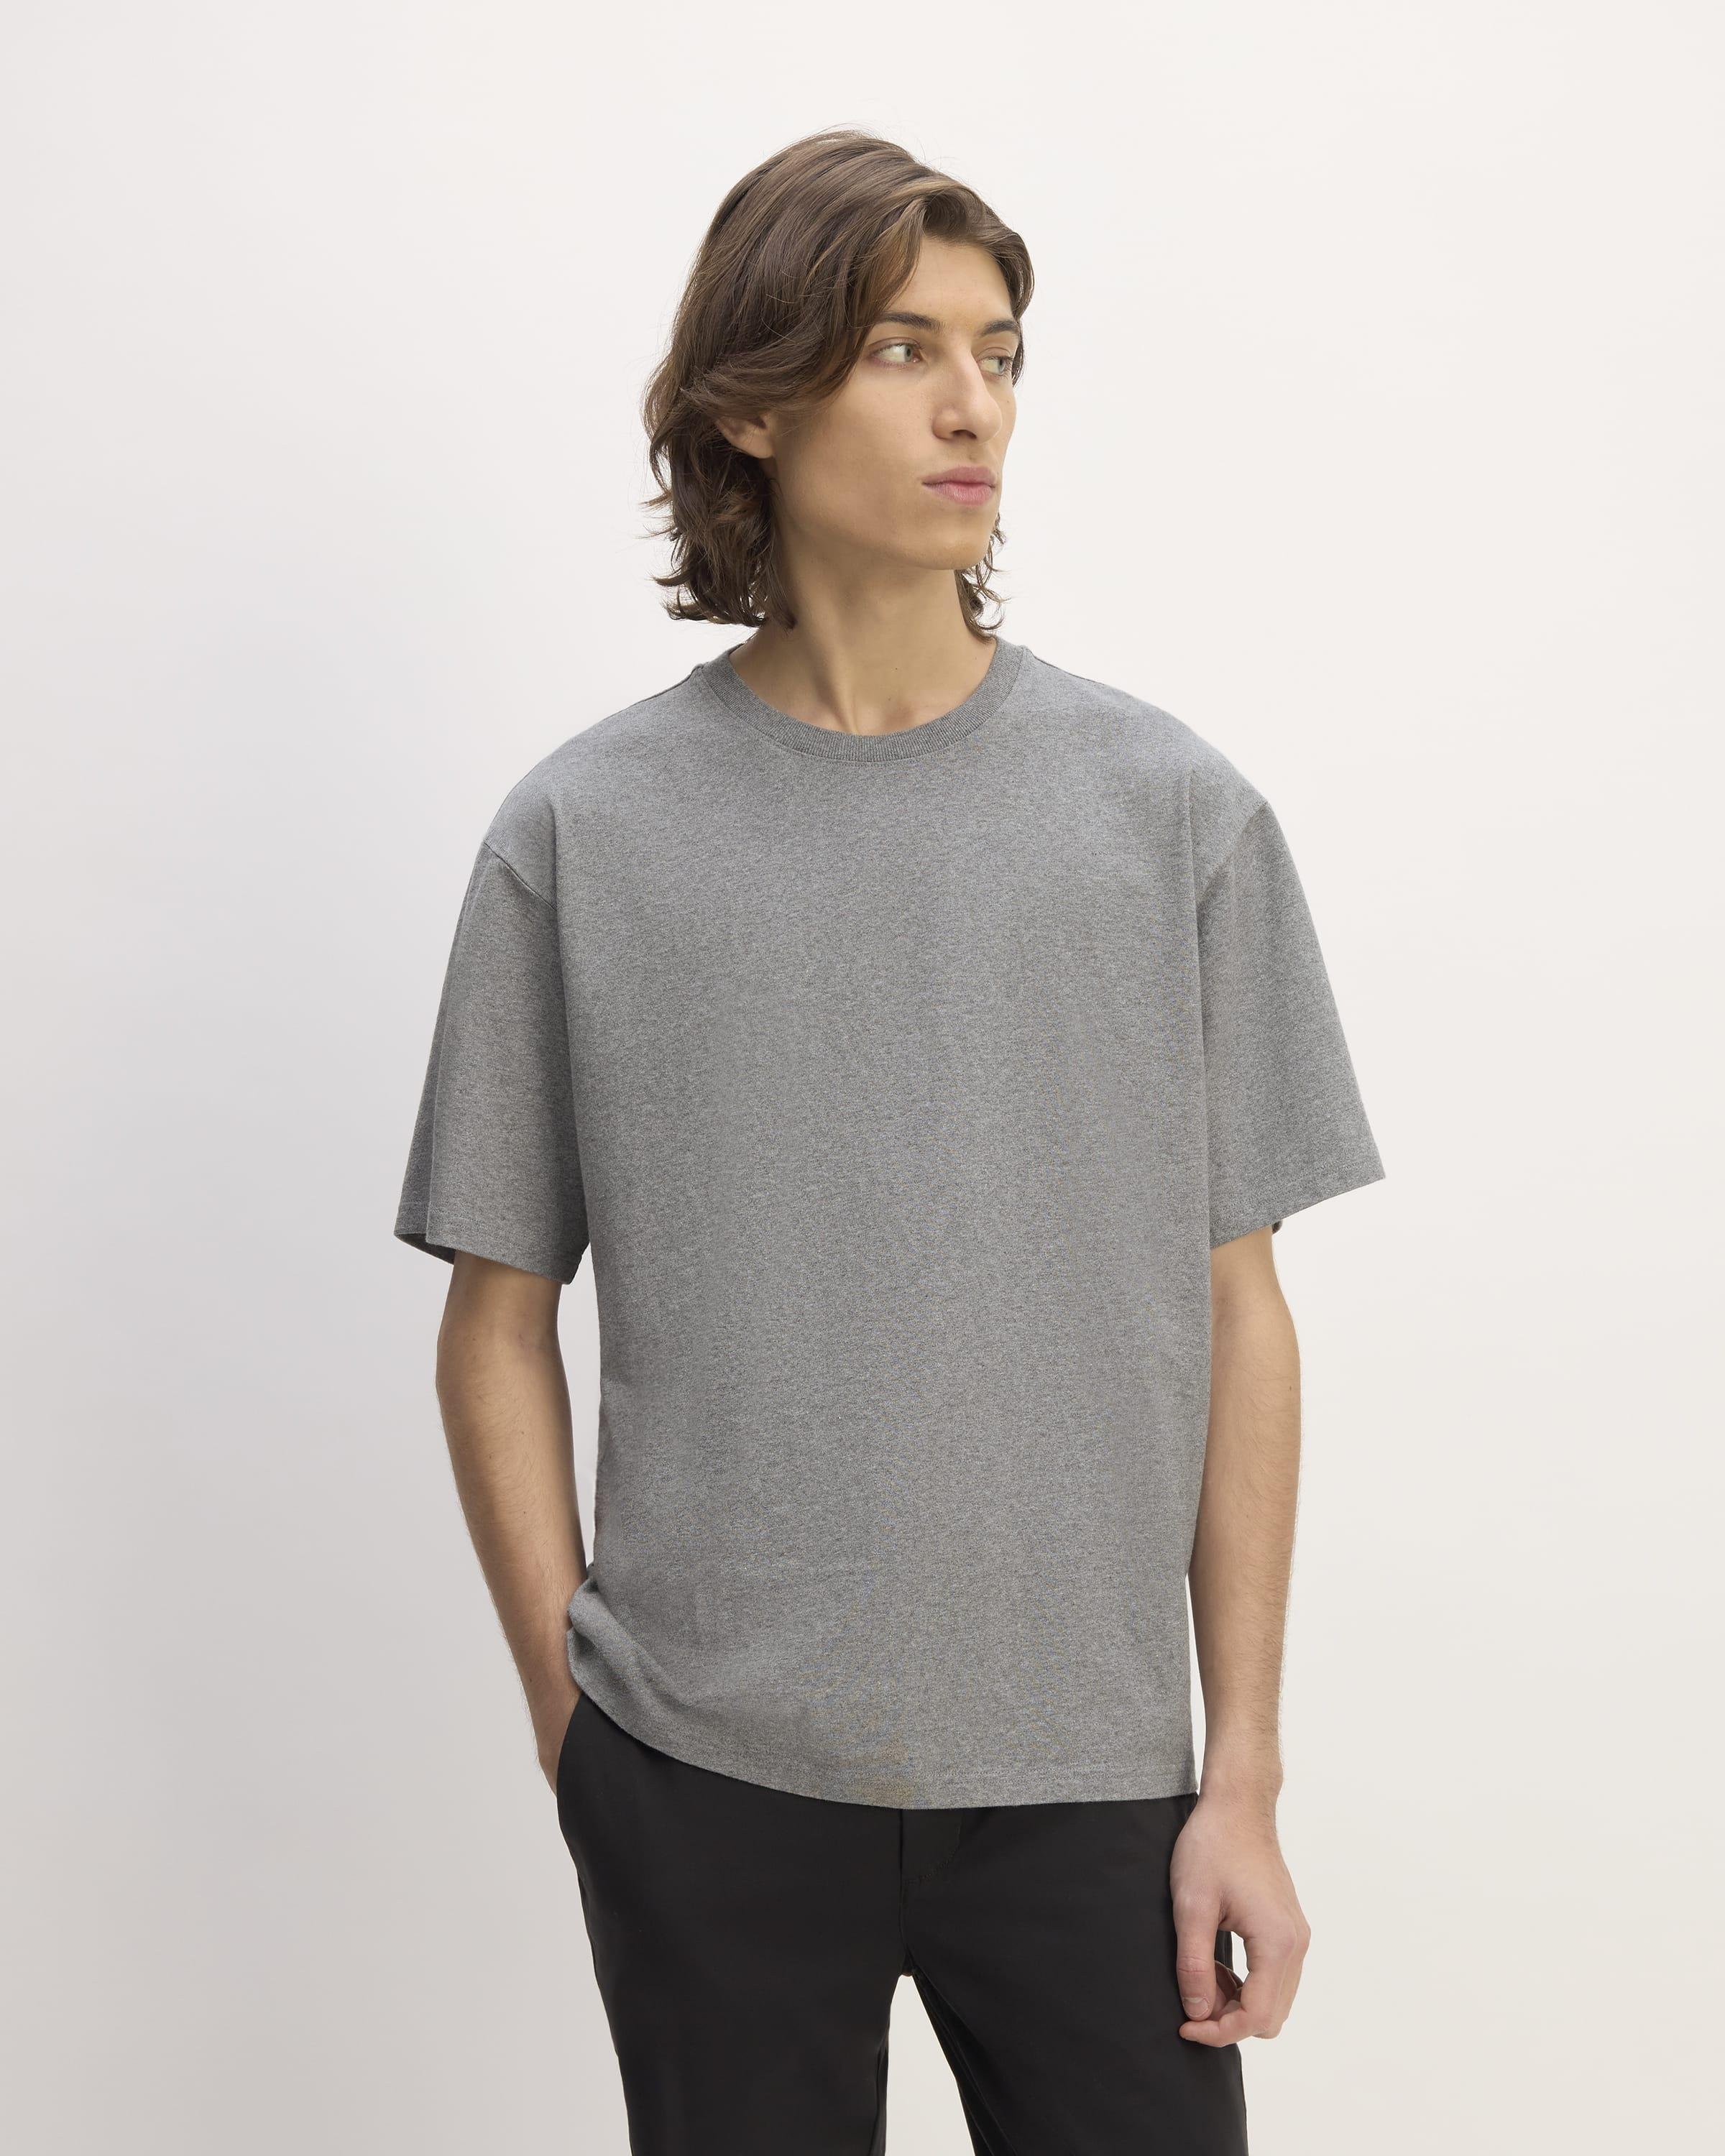 The Premium-Weight Relaxed Crew | Uniform by EVERLANE